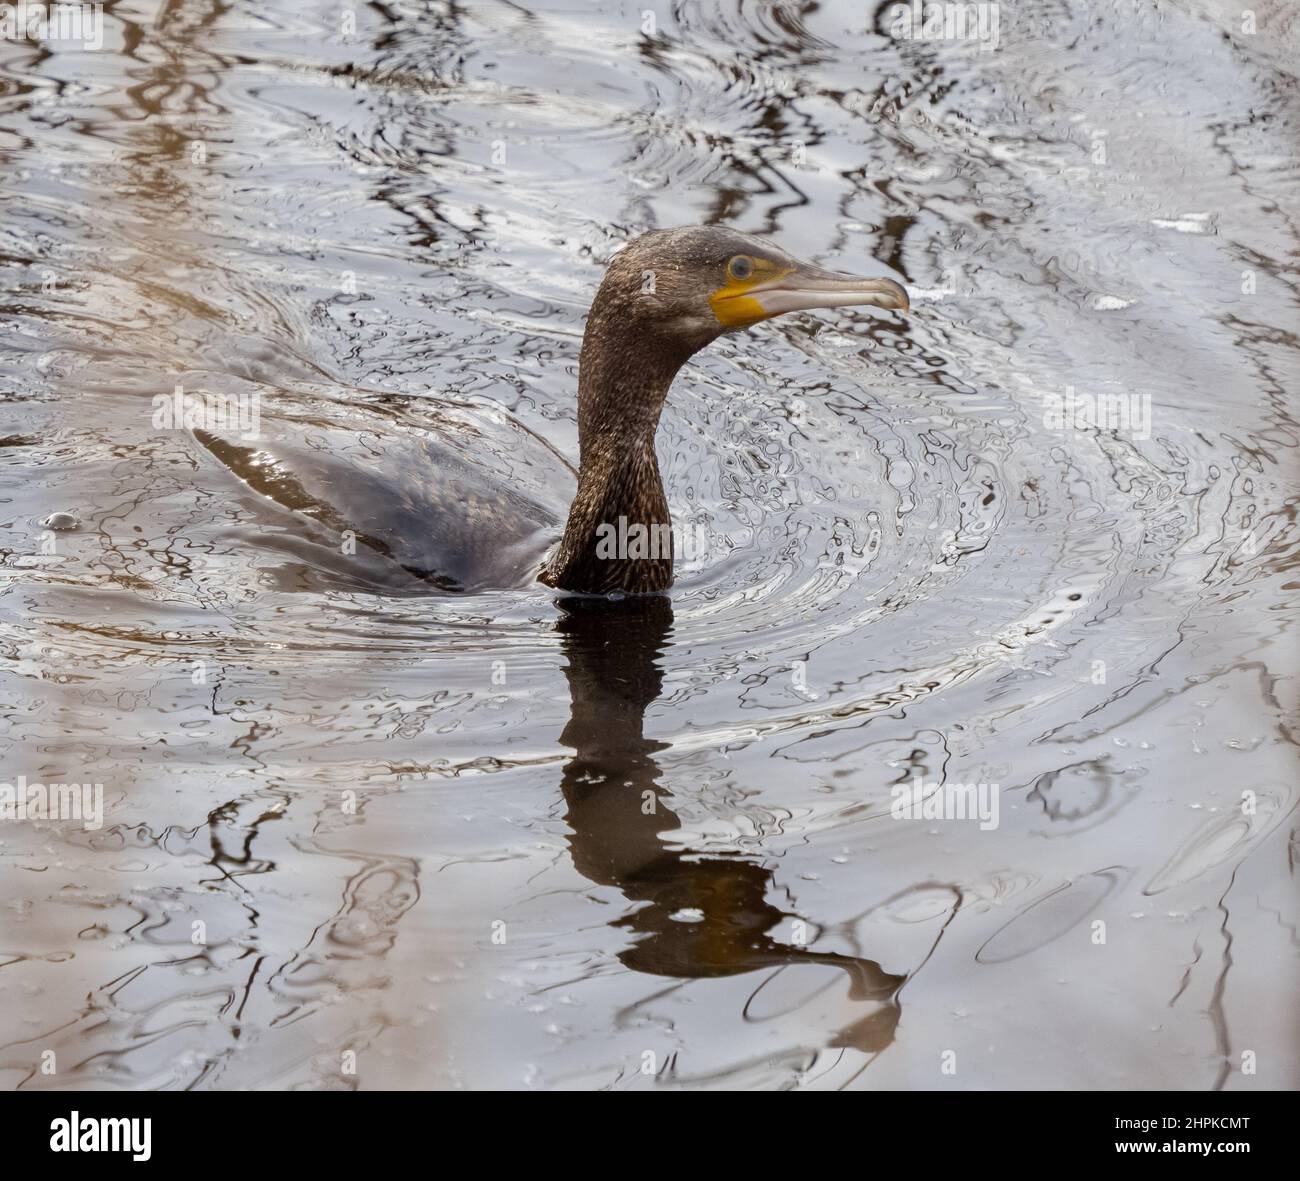 Cormorant Phalacrocorax carbo surfacing from a dive showing limited water-repellency of feathers compared to other diving birds - Somerset UK Stock Photo